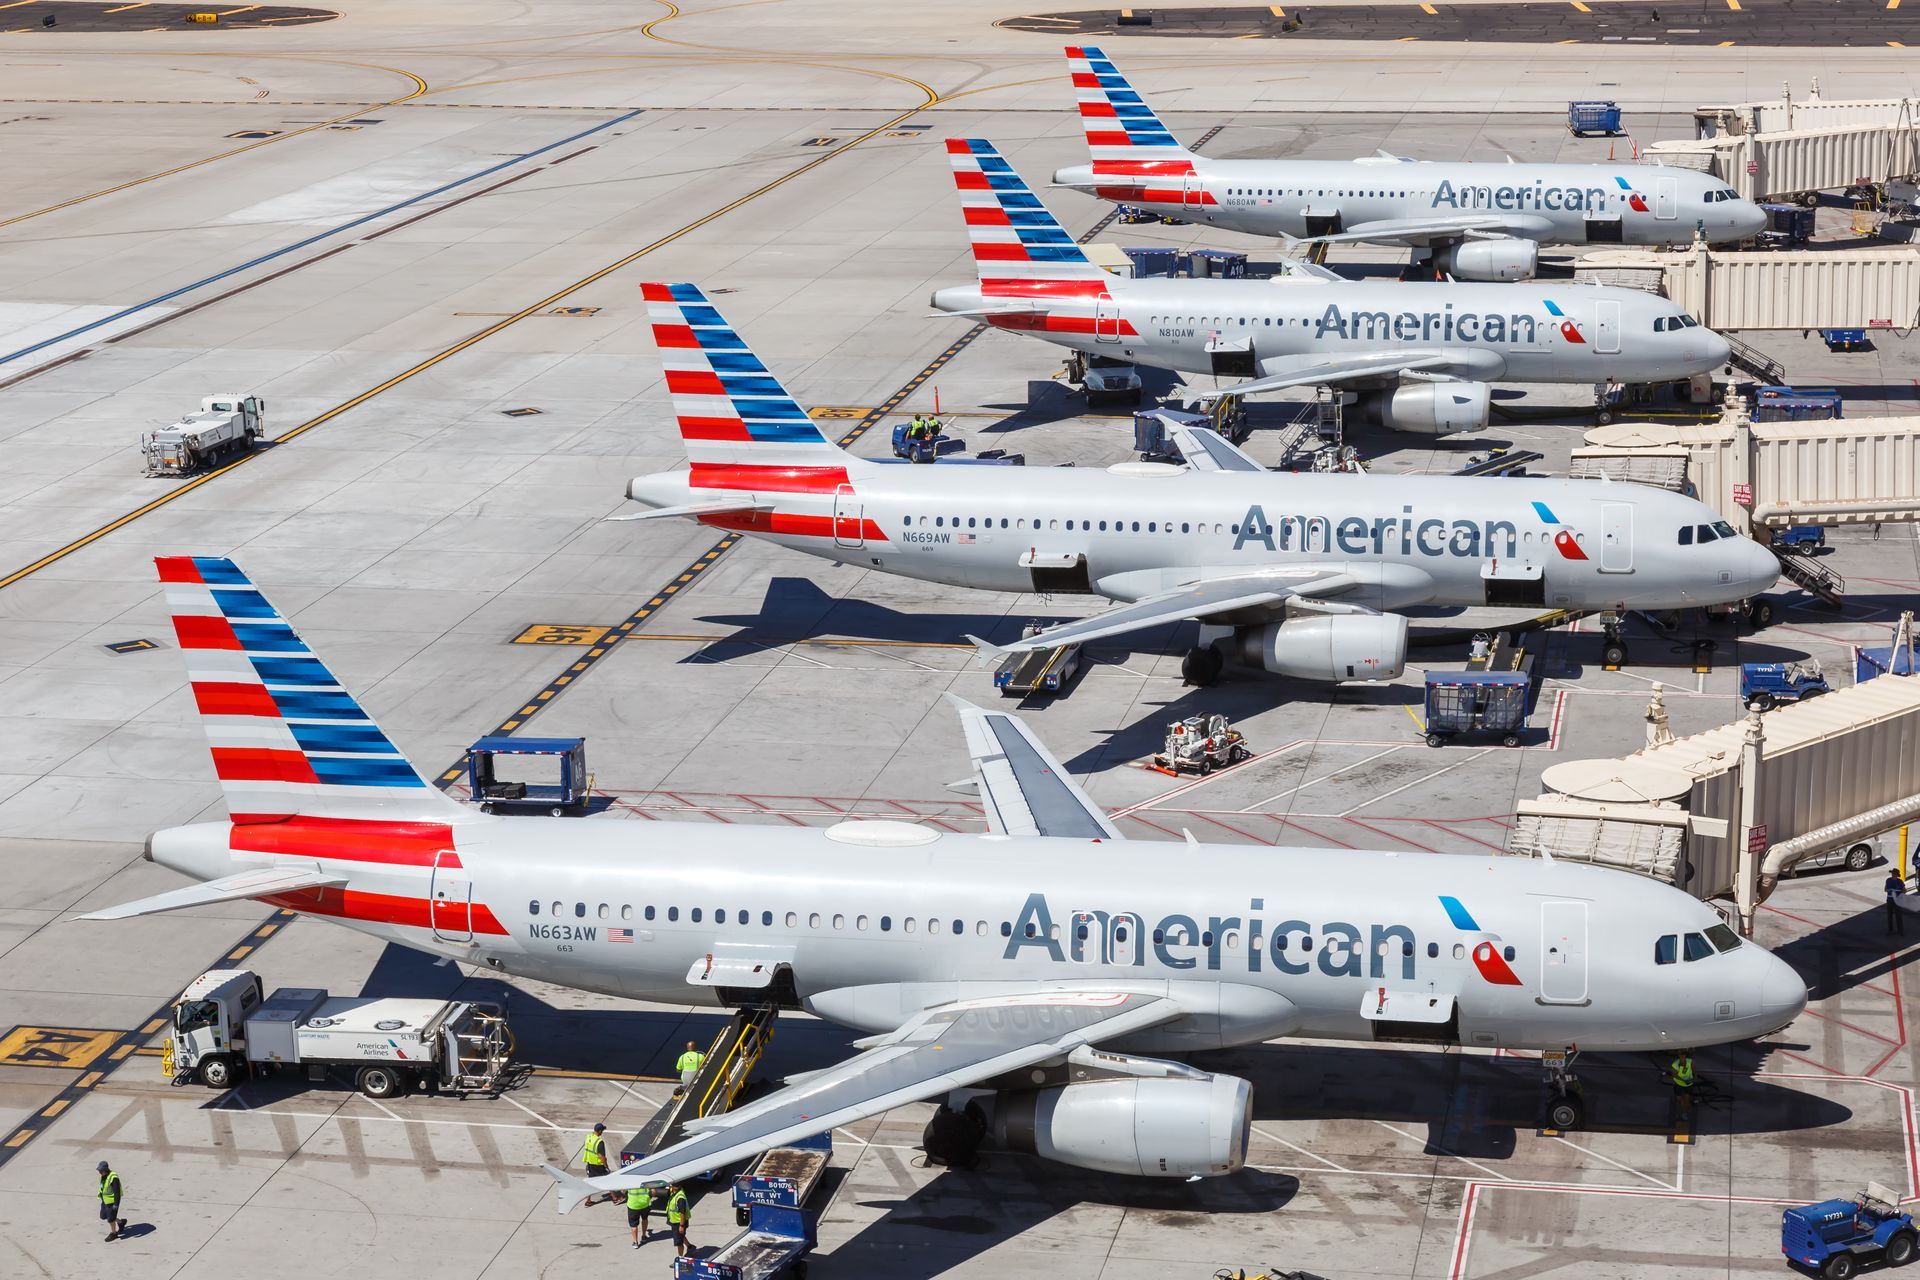 A row of american airlines planes are parked at an airport.